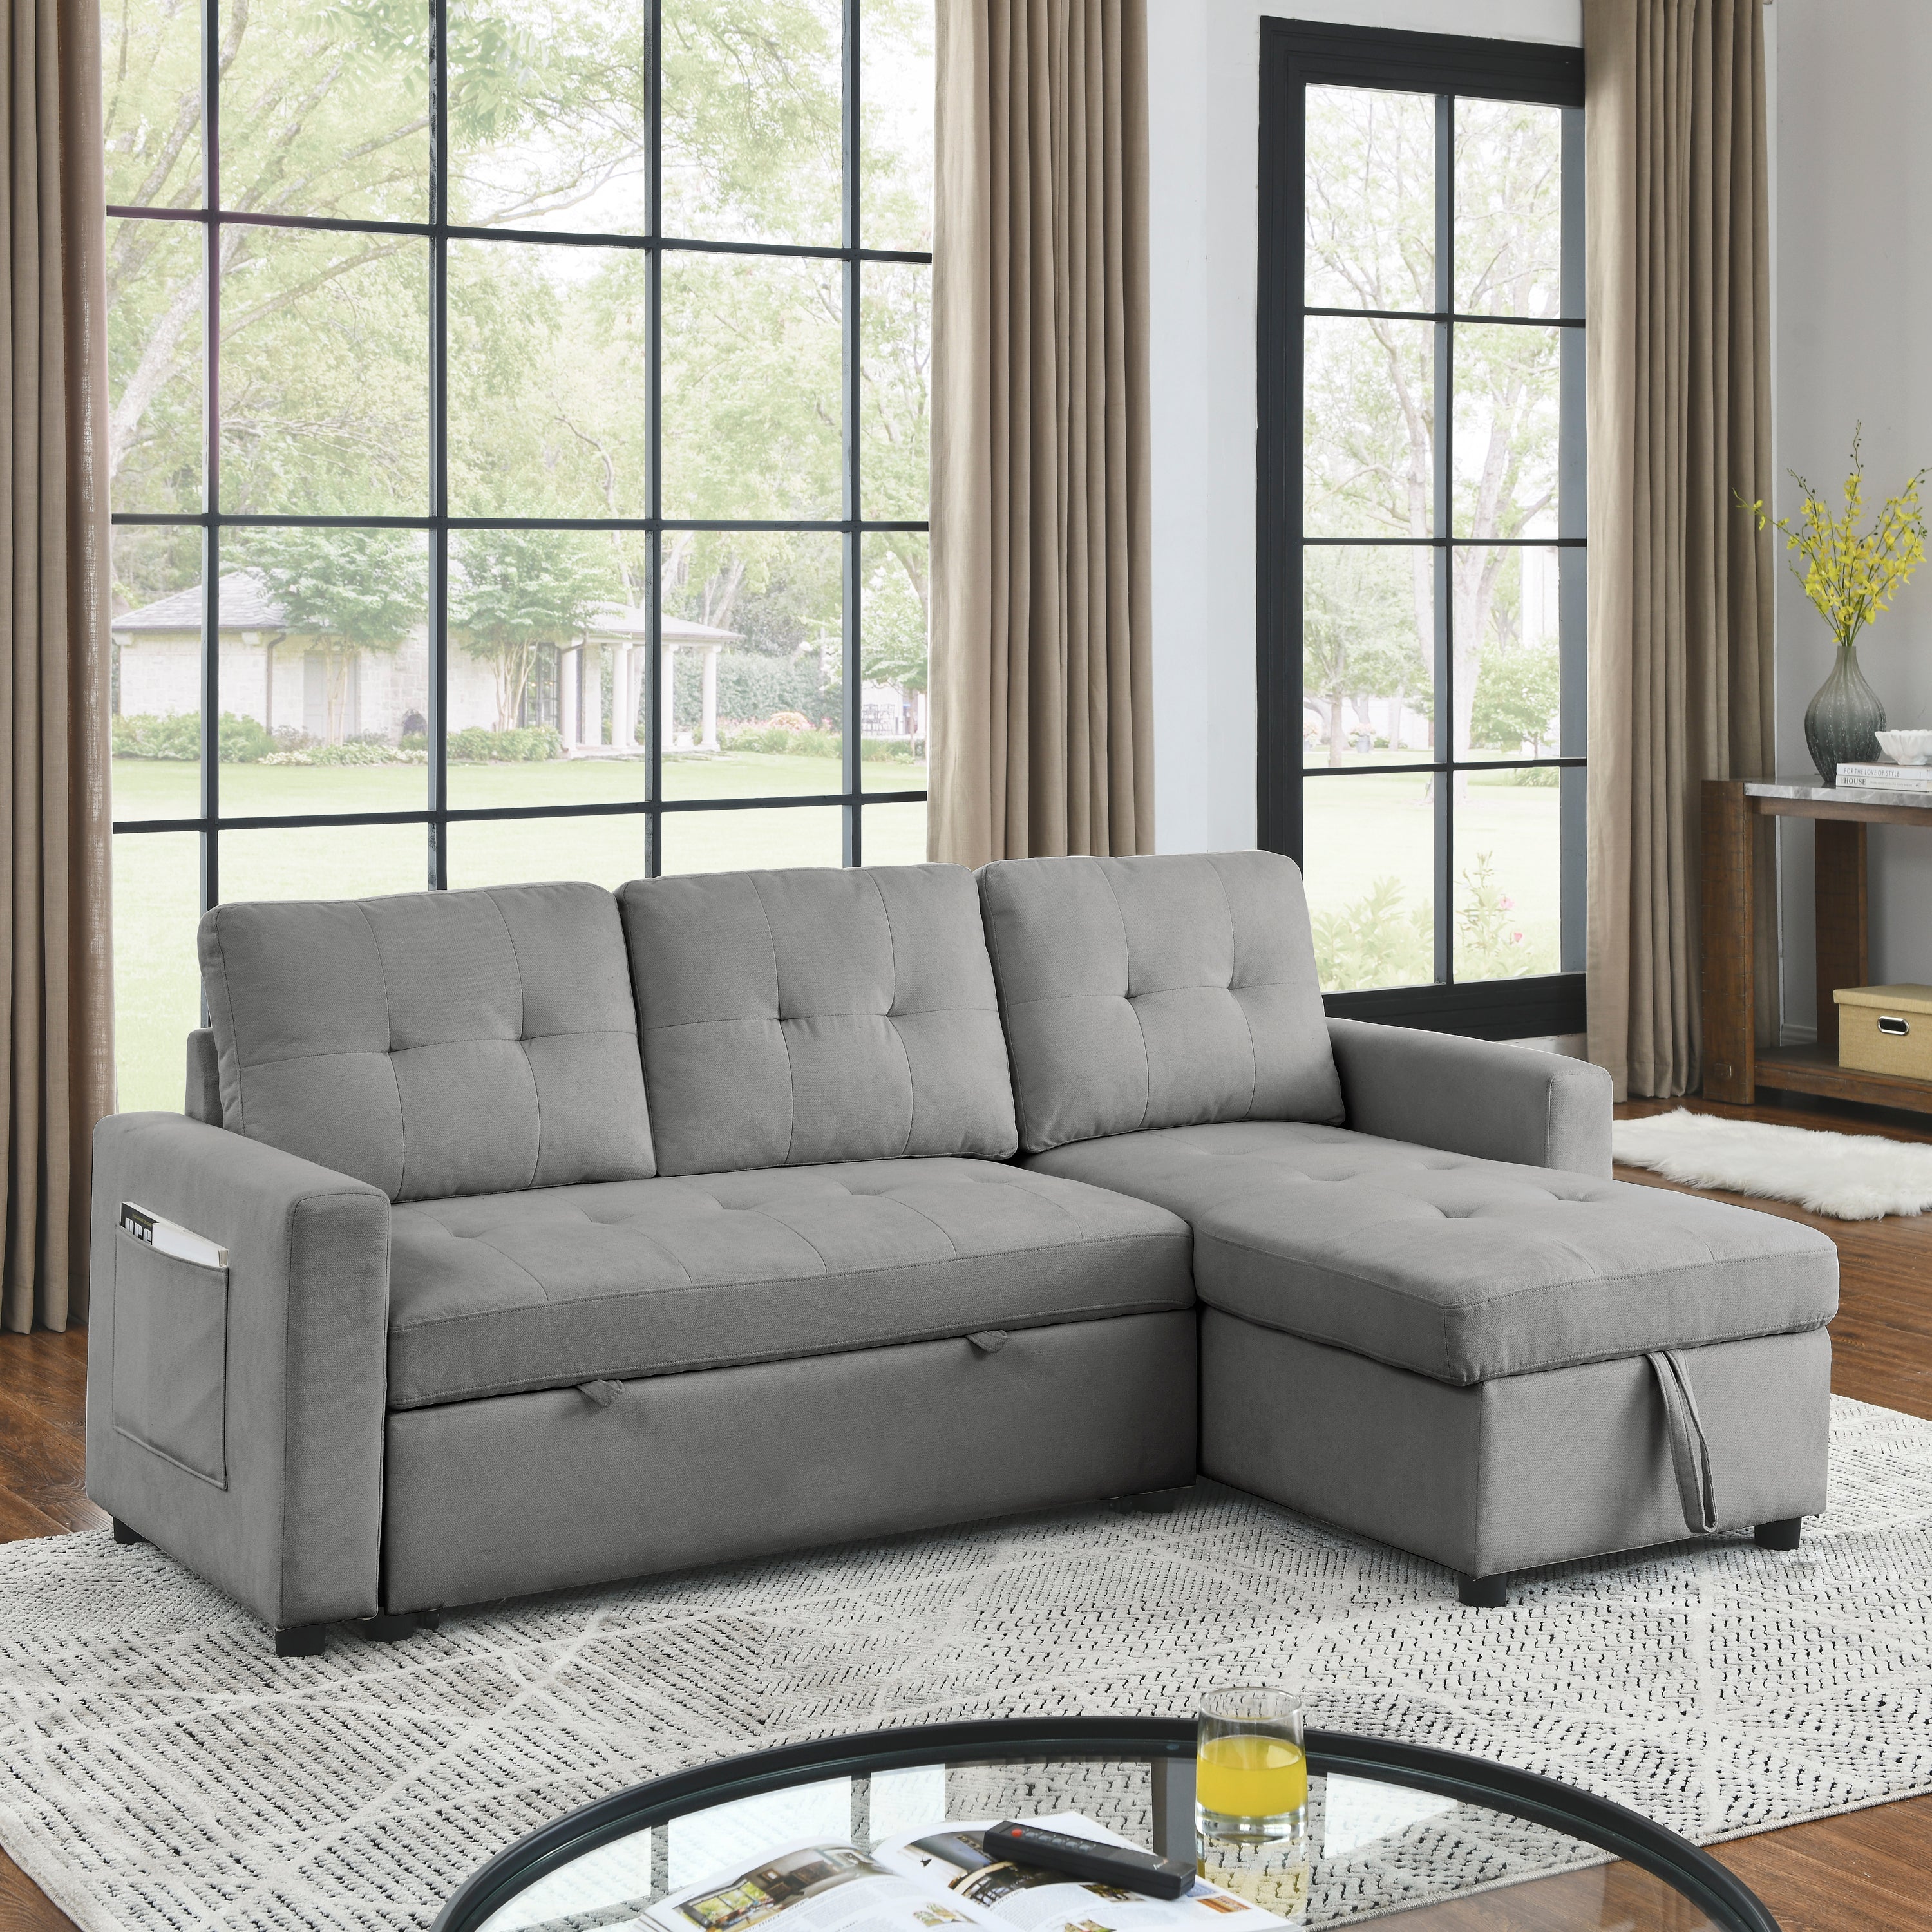 Gray Sleeper Sofa w/ Storage & Reversible Chaise-Sleeper Sofas-American Furniture Outlet